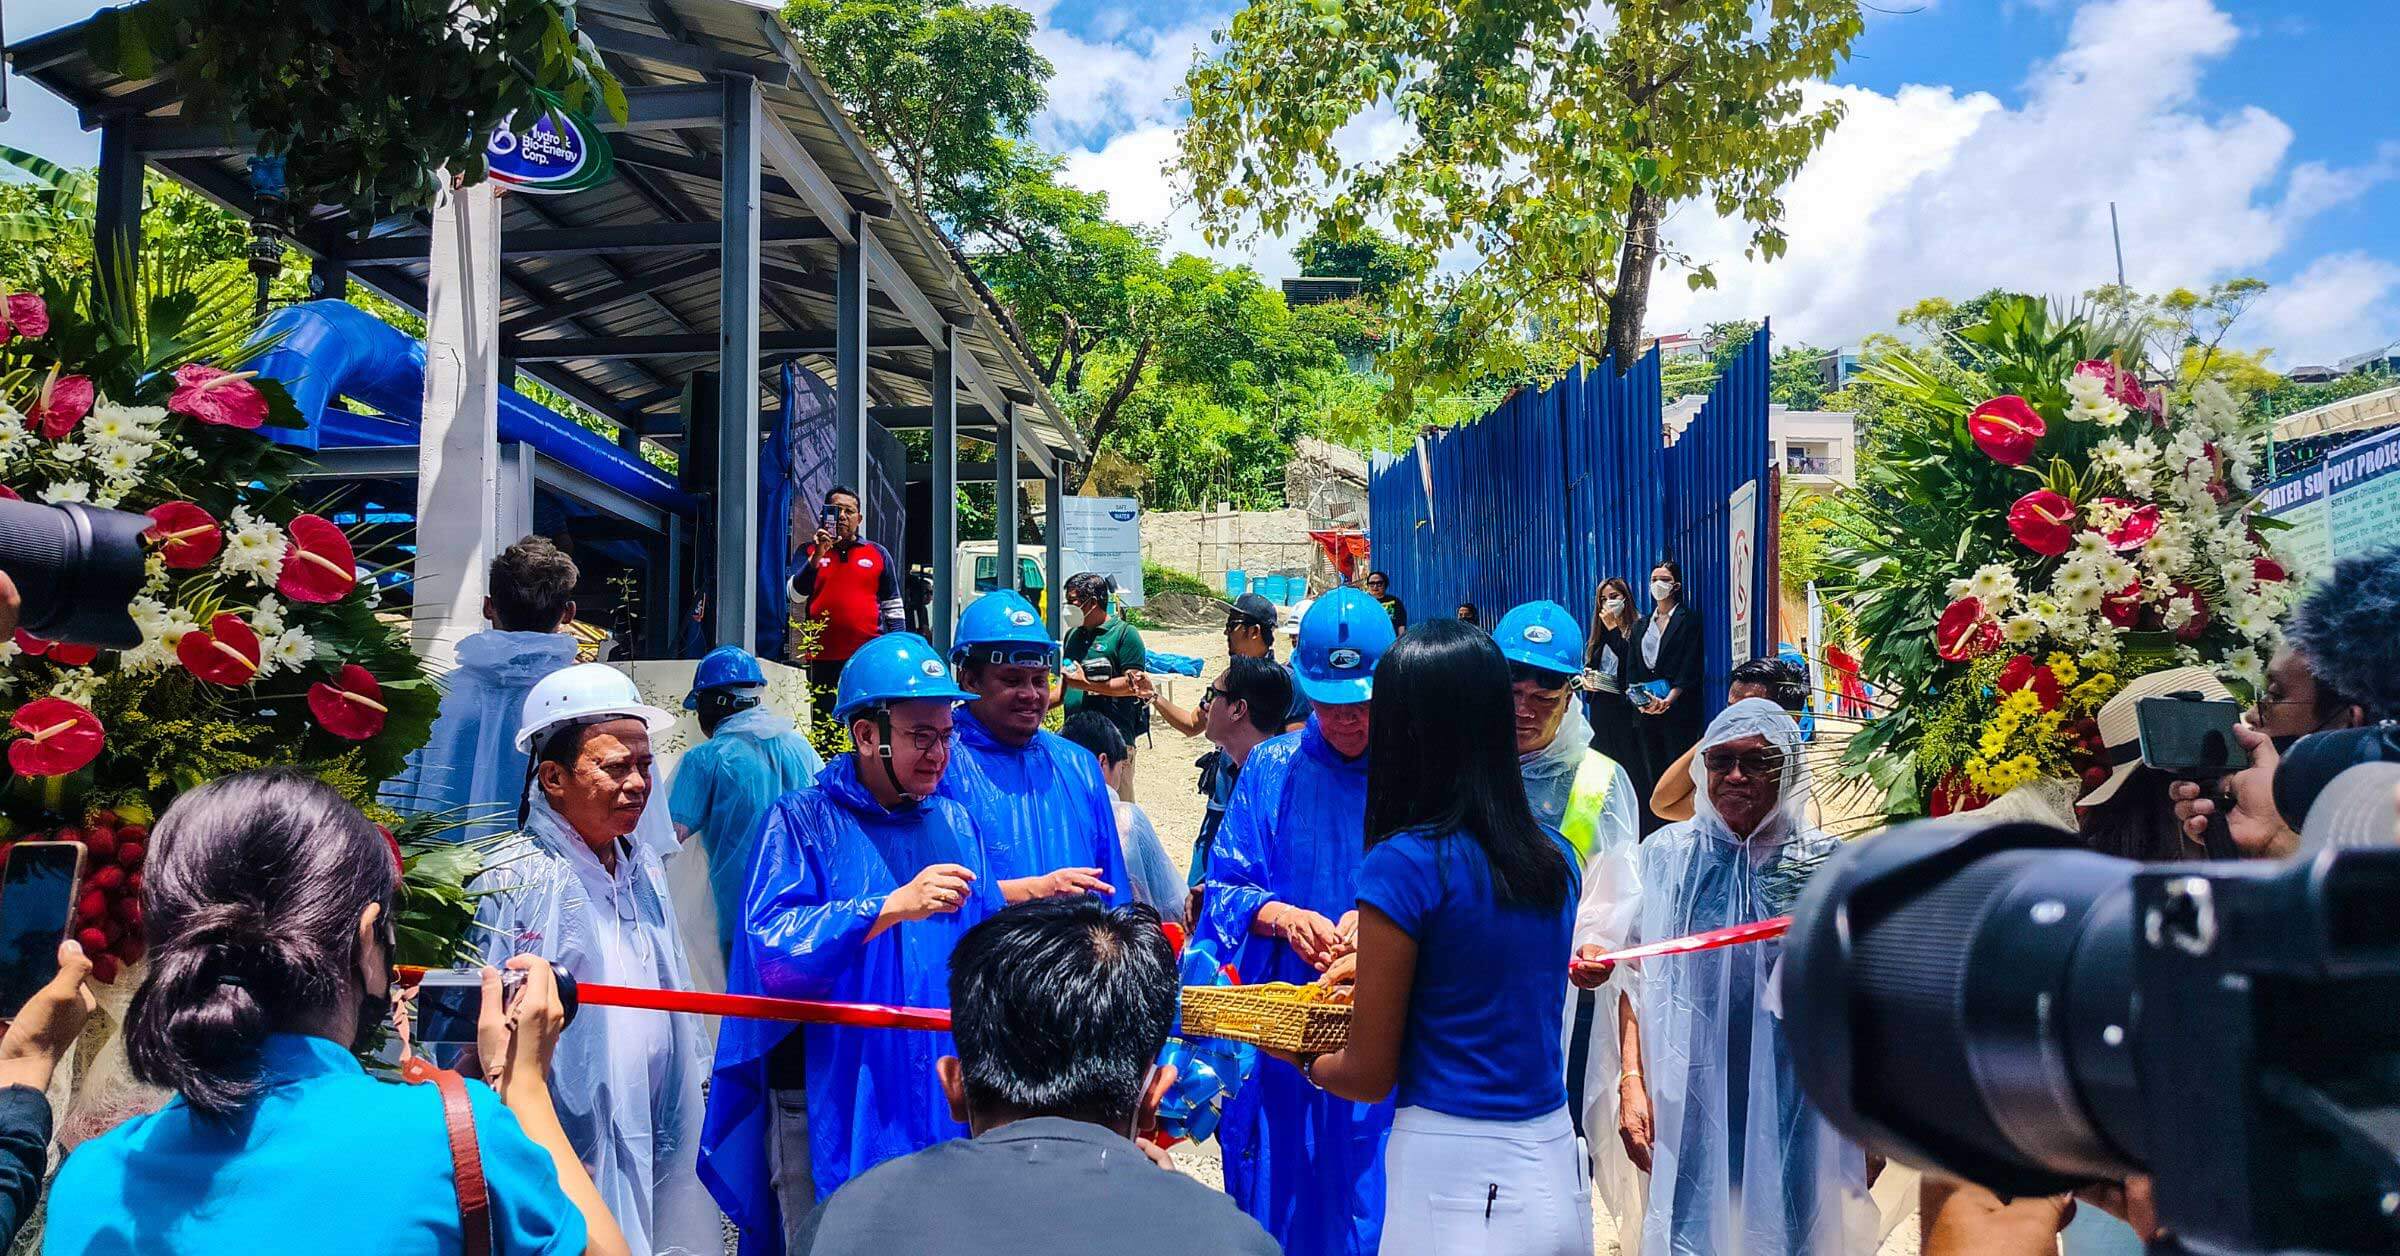 MCWD’s Lusaran water supply project to serve 40,000 households